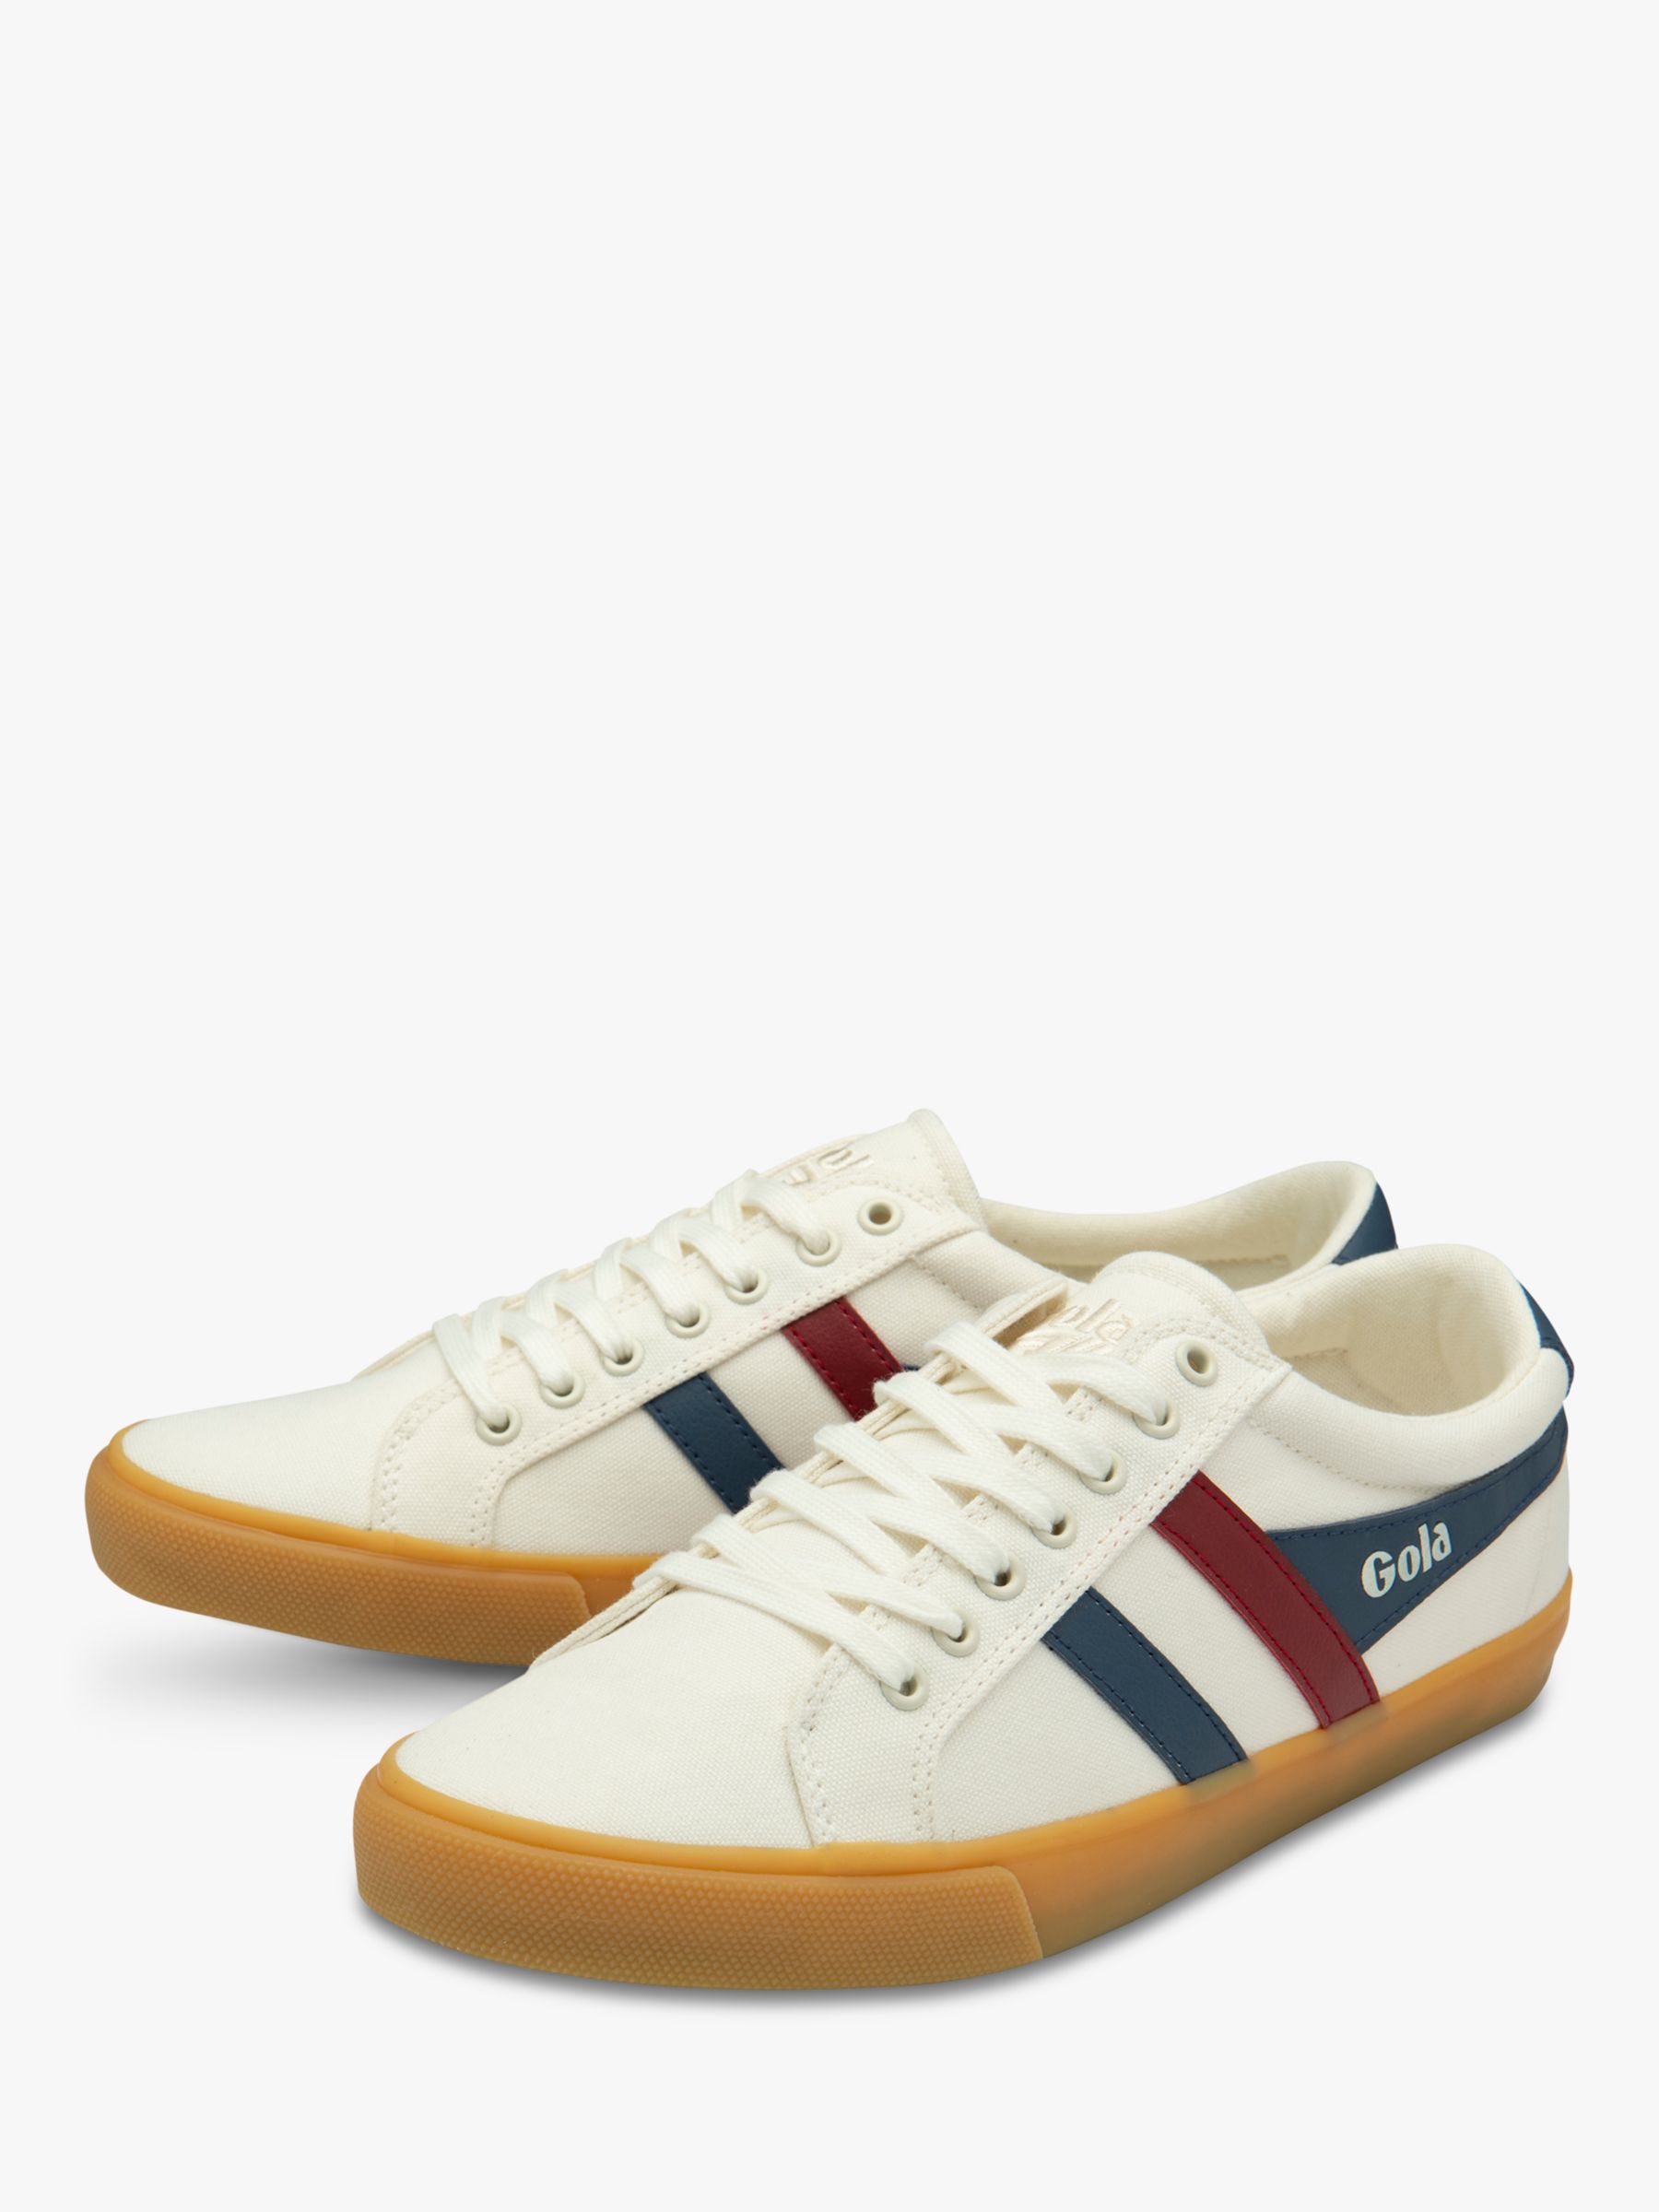 Buy Gola Classics Varsity Lace Up Trainers, White/Moonlight/Red/Gum Online at johnlewis.com